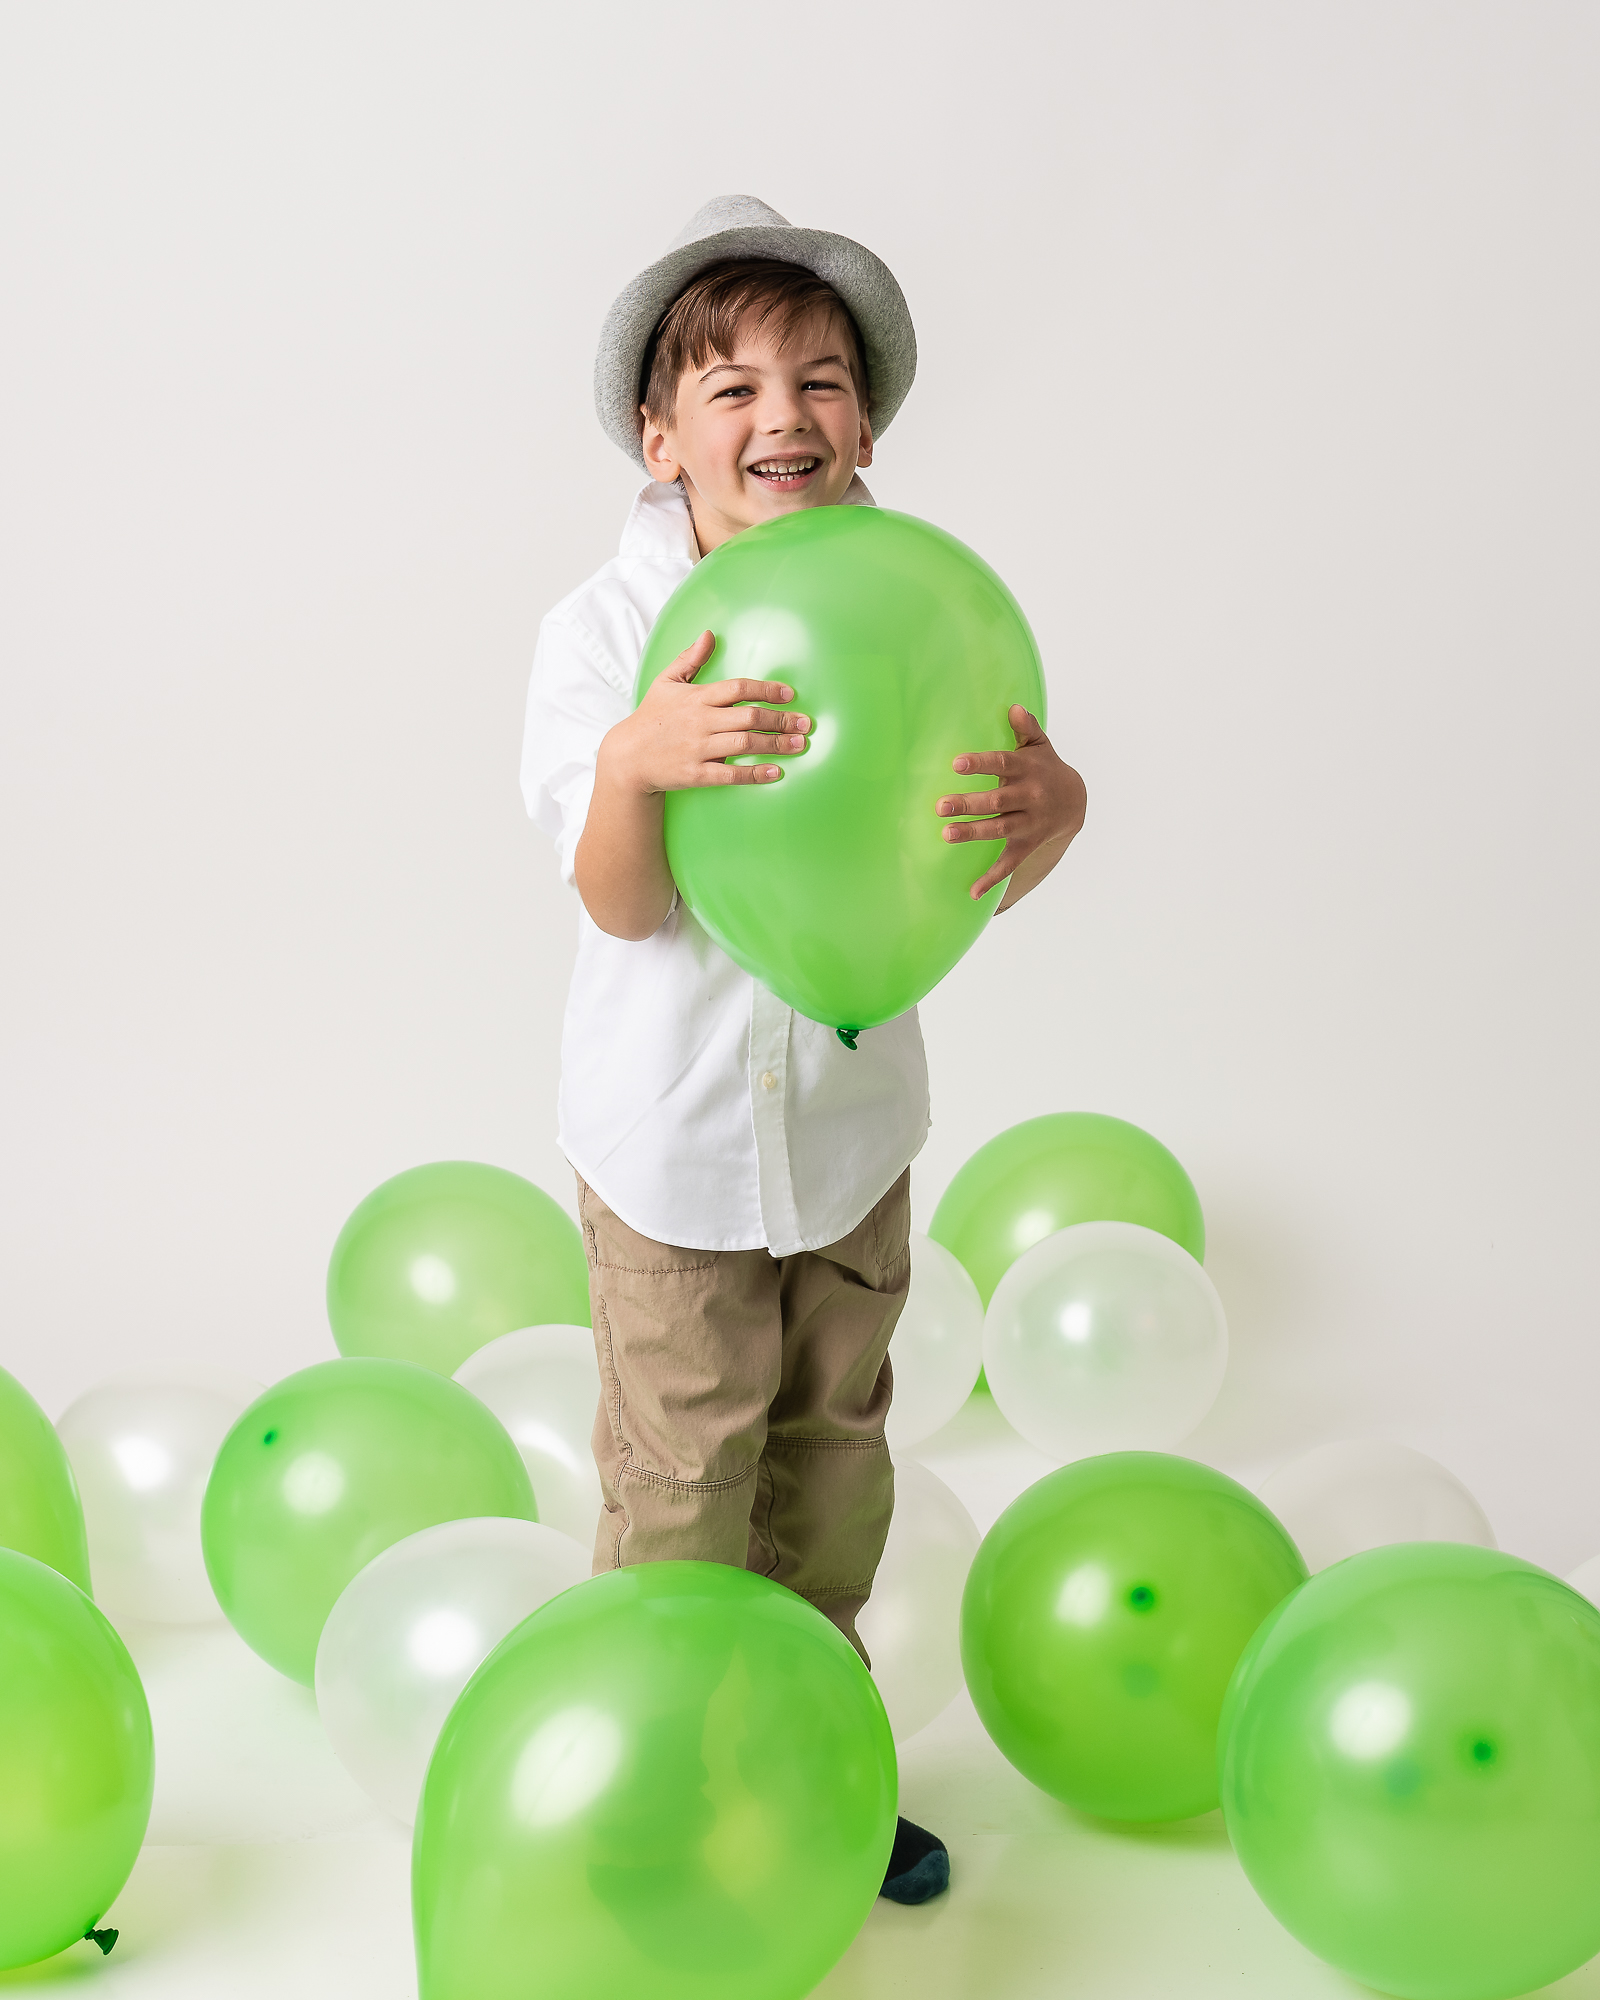 kid playing with balloons in a studio